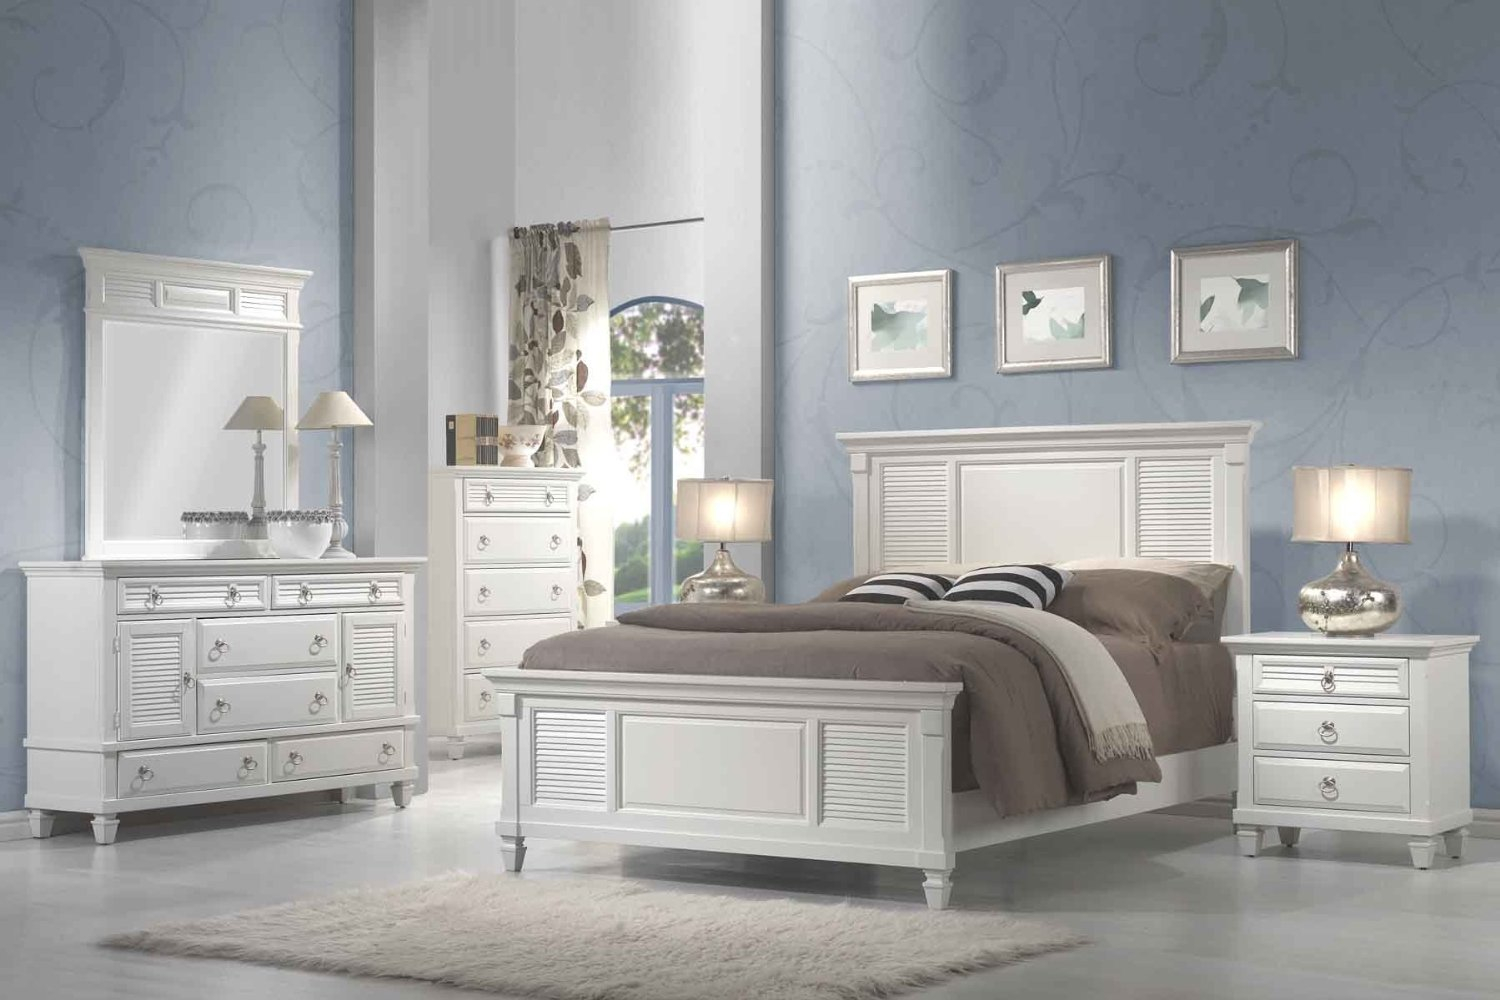 11 Affordable Bedroom Sets We Love The Simple Dollar regarding dimensions 1500 X 1000